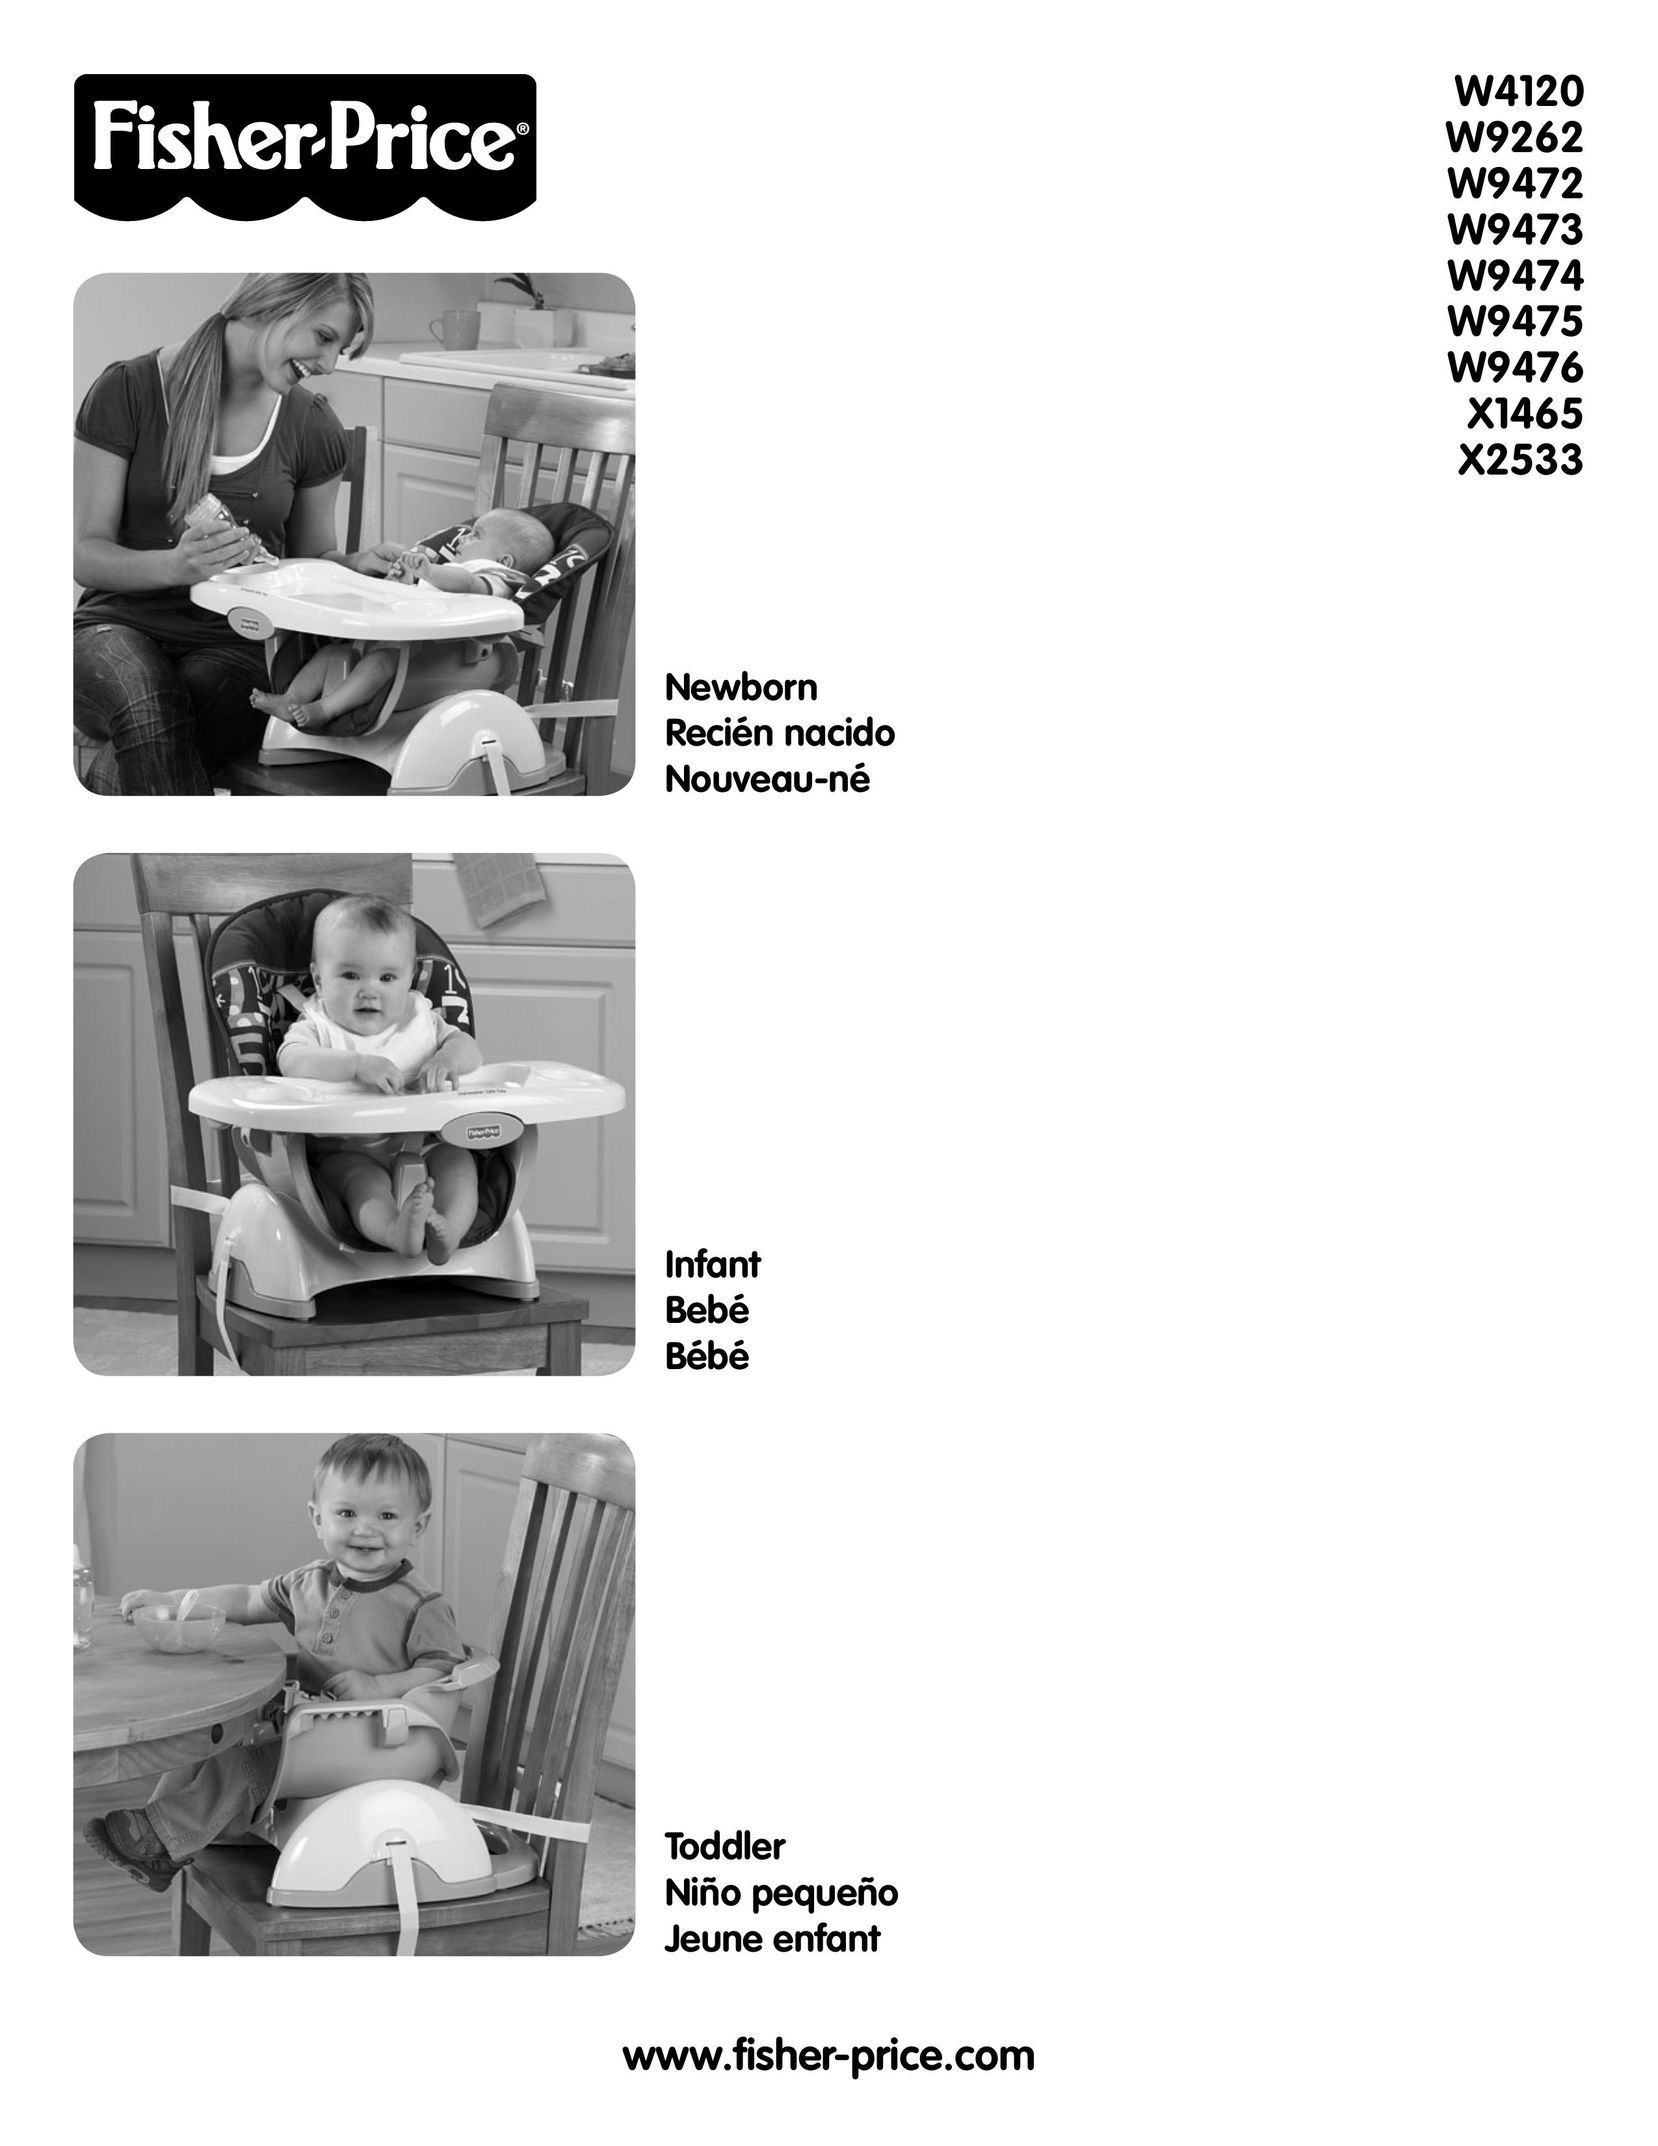 Fisher-Price W9473 High Chair User Manual